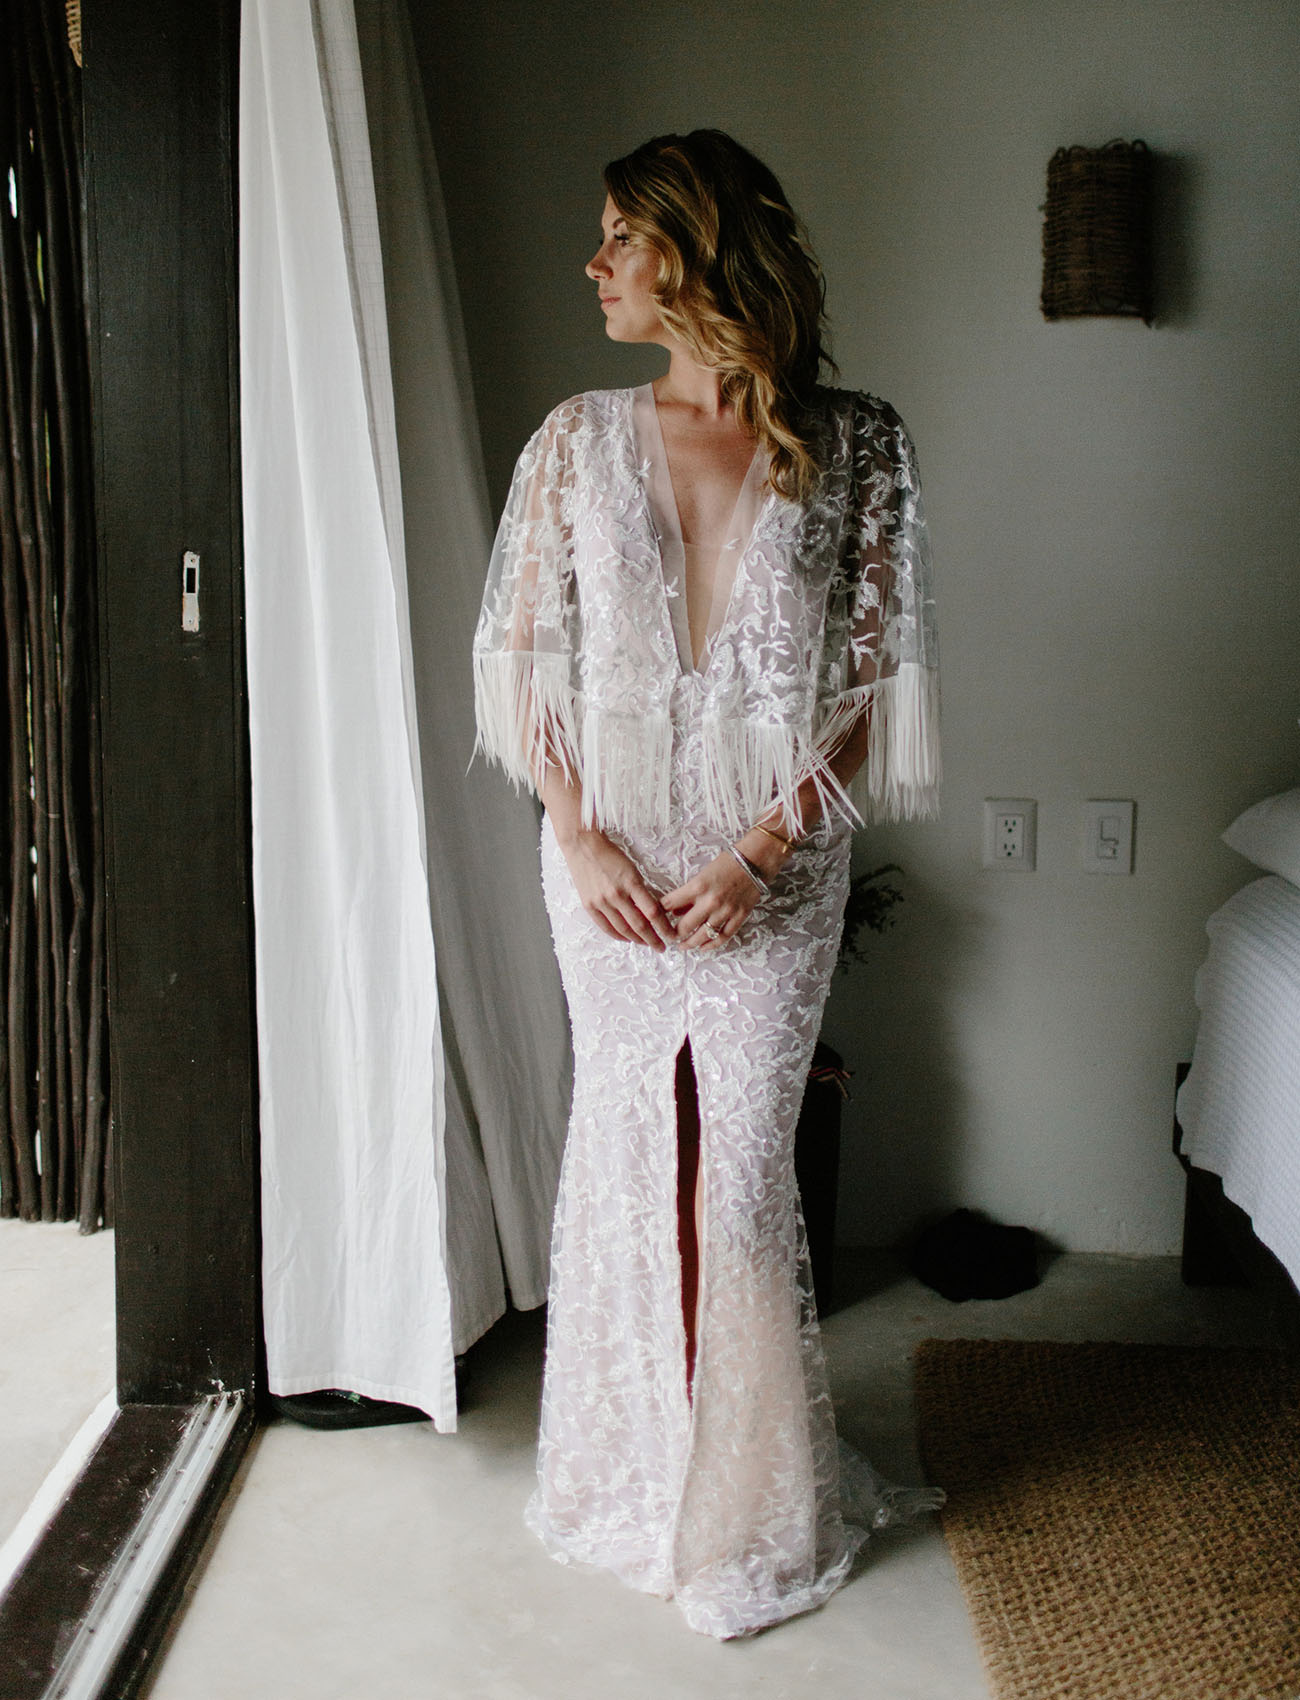 Chelsea was rocking a glam boho gown with lace appliques, a plunging neckline, a front slit and long fringe on the bell sleeves